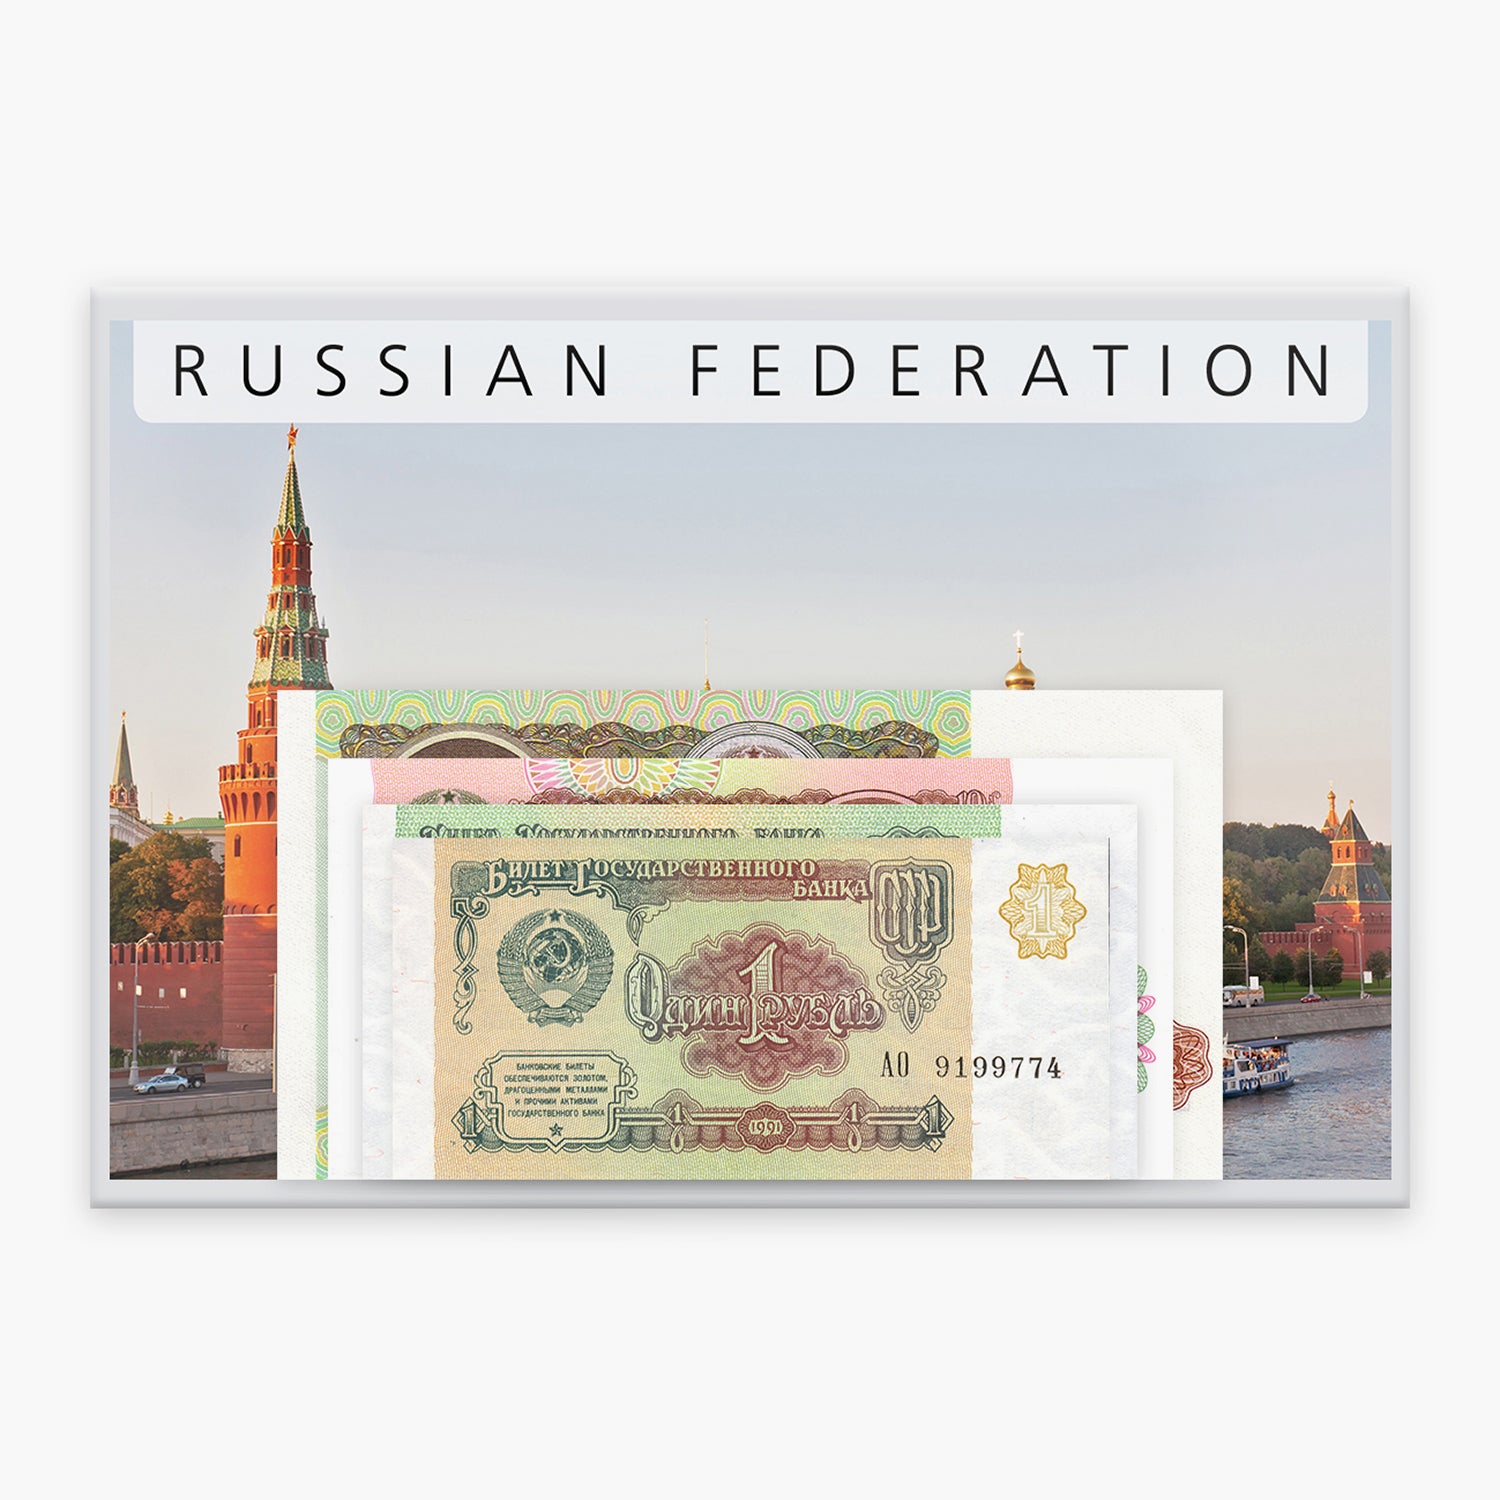 The last Banknote Issues from the USSR